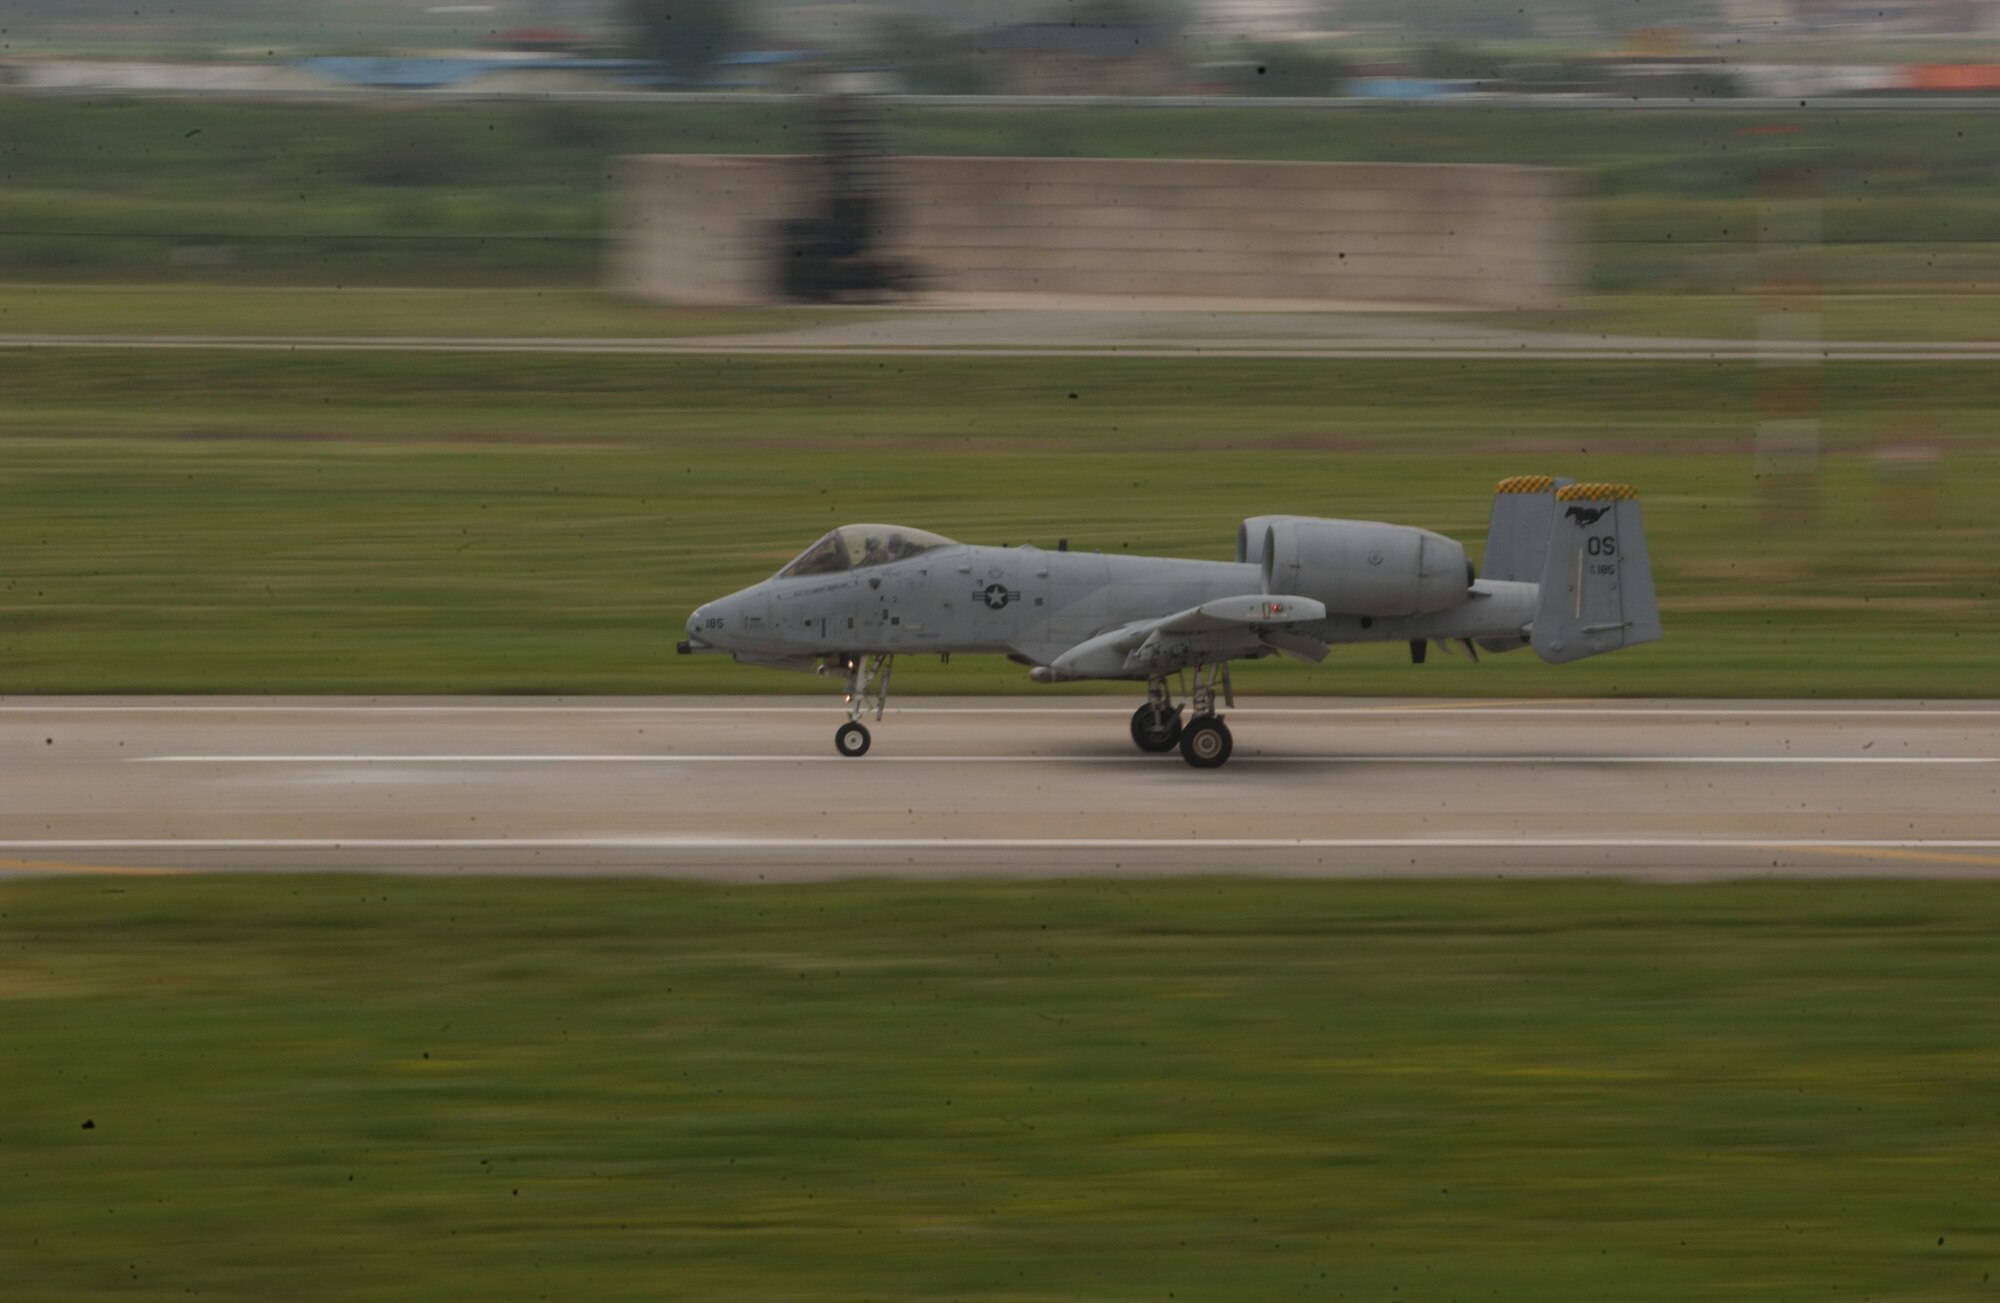 OSAN AIR BASE, Republic of Korea -- An A-10 Thunderbolt II from the 25th Fighter Squadron returns here today after a temporary deployment to Kunsan AB during repairs and maintenance to the airfield. (U.S. Air Force photo by Airman Jason Epley)